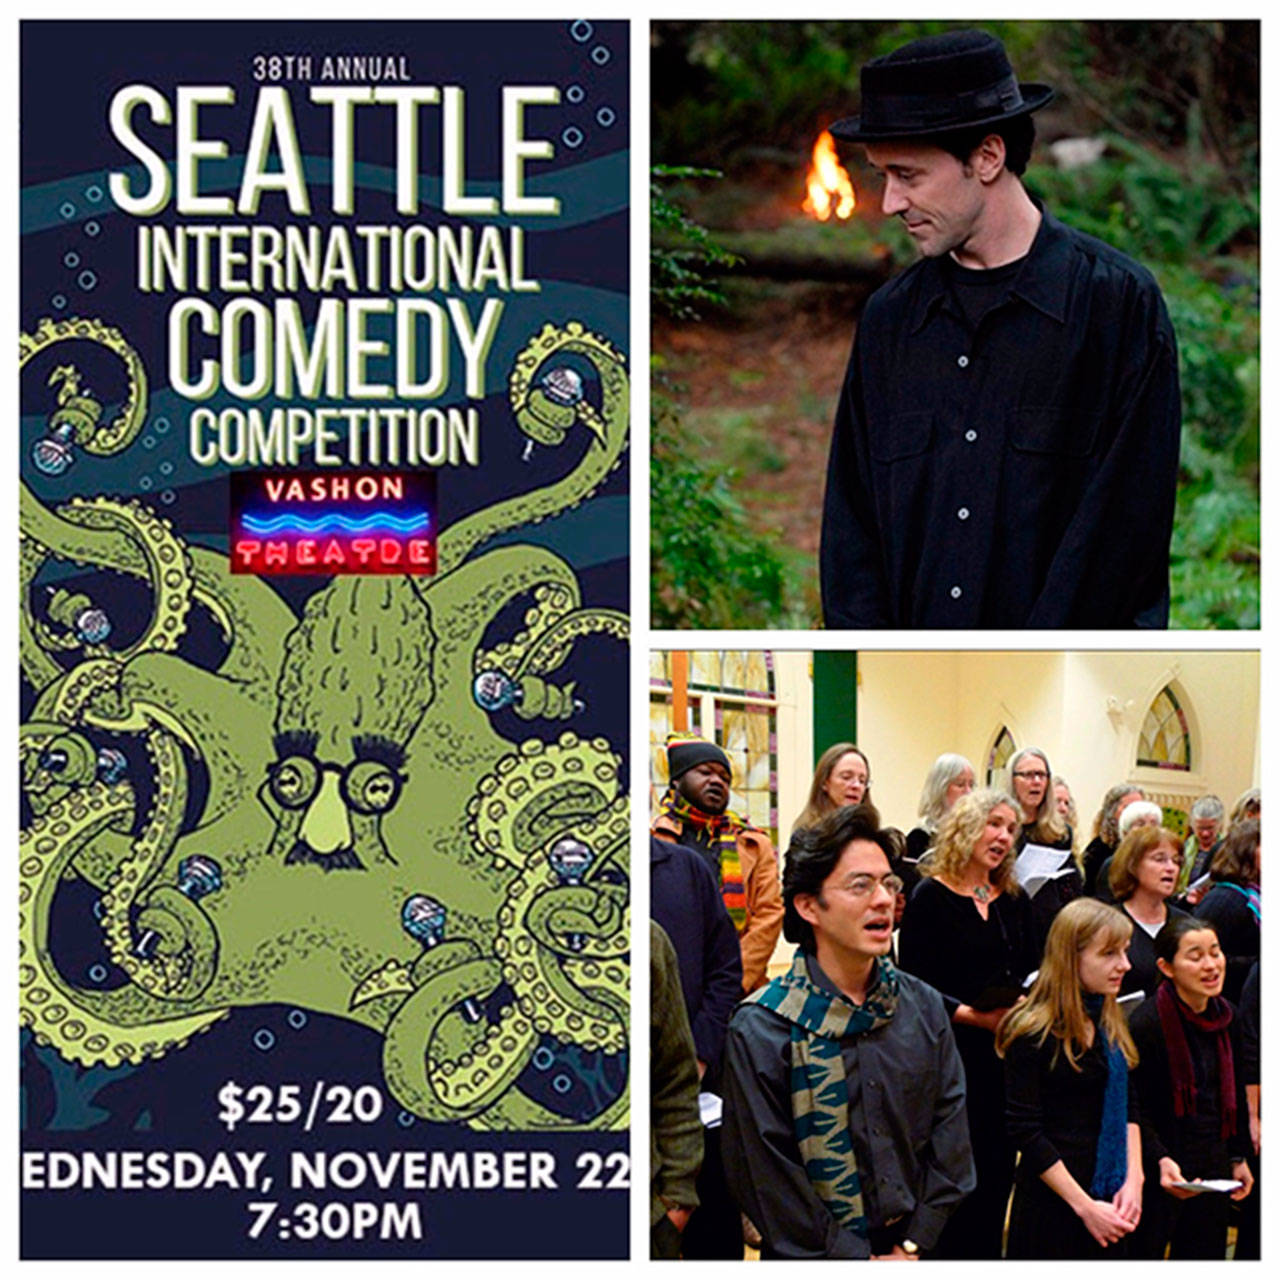 Comedians participating in the Seattle International comedy competition will take to Vashon Theatre Wednesday (left), island performing artist Kevin Joyce will present a show Friday that he is billing as “music and humor for dark times” (top right), Vashon’s Free Range Folk Choir will present a show featuring songs of hope and thanksgiving Friday (bottom right). (Courtesy Photos)